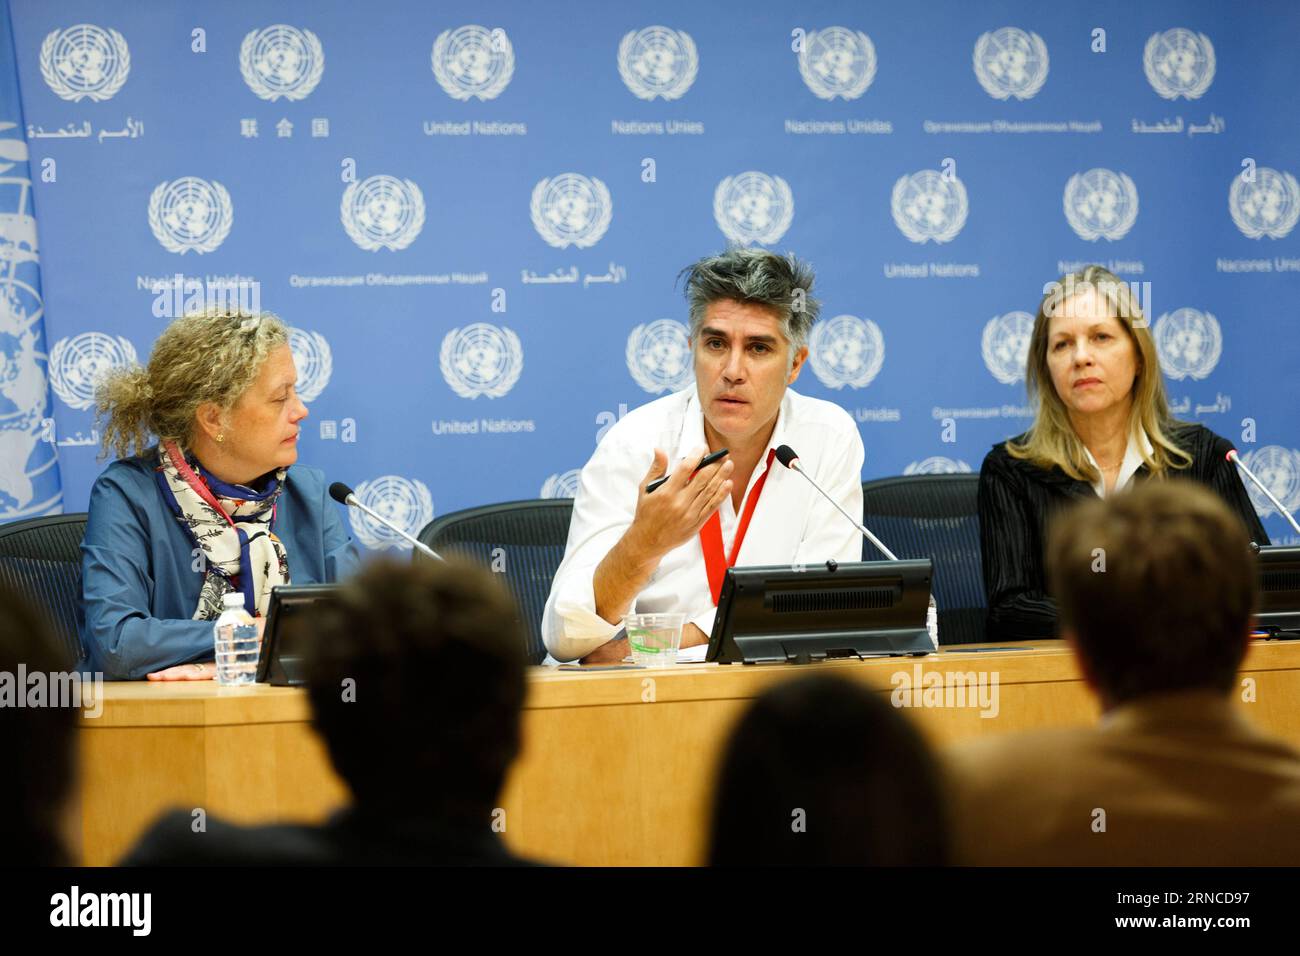 (160405) -- NEW YORK, April 5, 2016 -- Alejandro Aravena, Chilean architect and winner of the Pritzker Architecture Prize for 2016, briefs journalists on the link between architecture and sustainable development, at the United Nations headquarters in New York, April 5, 2016. He is flanked by Paloma Duran (L), director of the Sustainable Development Goals Fund at the UN Development Programme (UNDP) and Martha Thorne, executive director of the Pritzker Architecture Prize. The Sustainable Development Goals Fund (SDGF) and Pritzker Architecture Prize laureate Alejandro Aravena draw on the role of Stock Photo